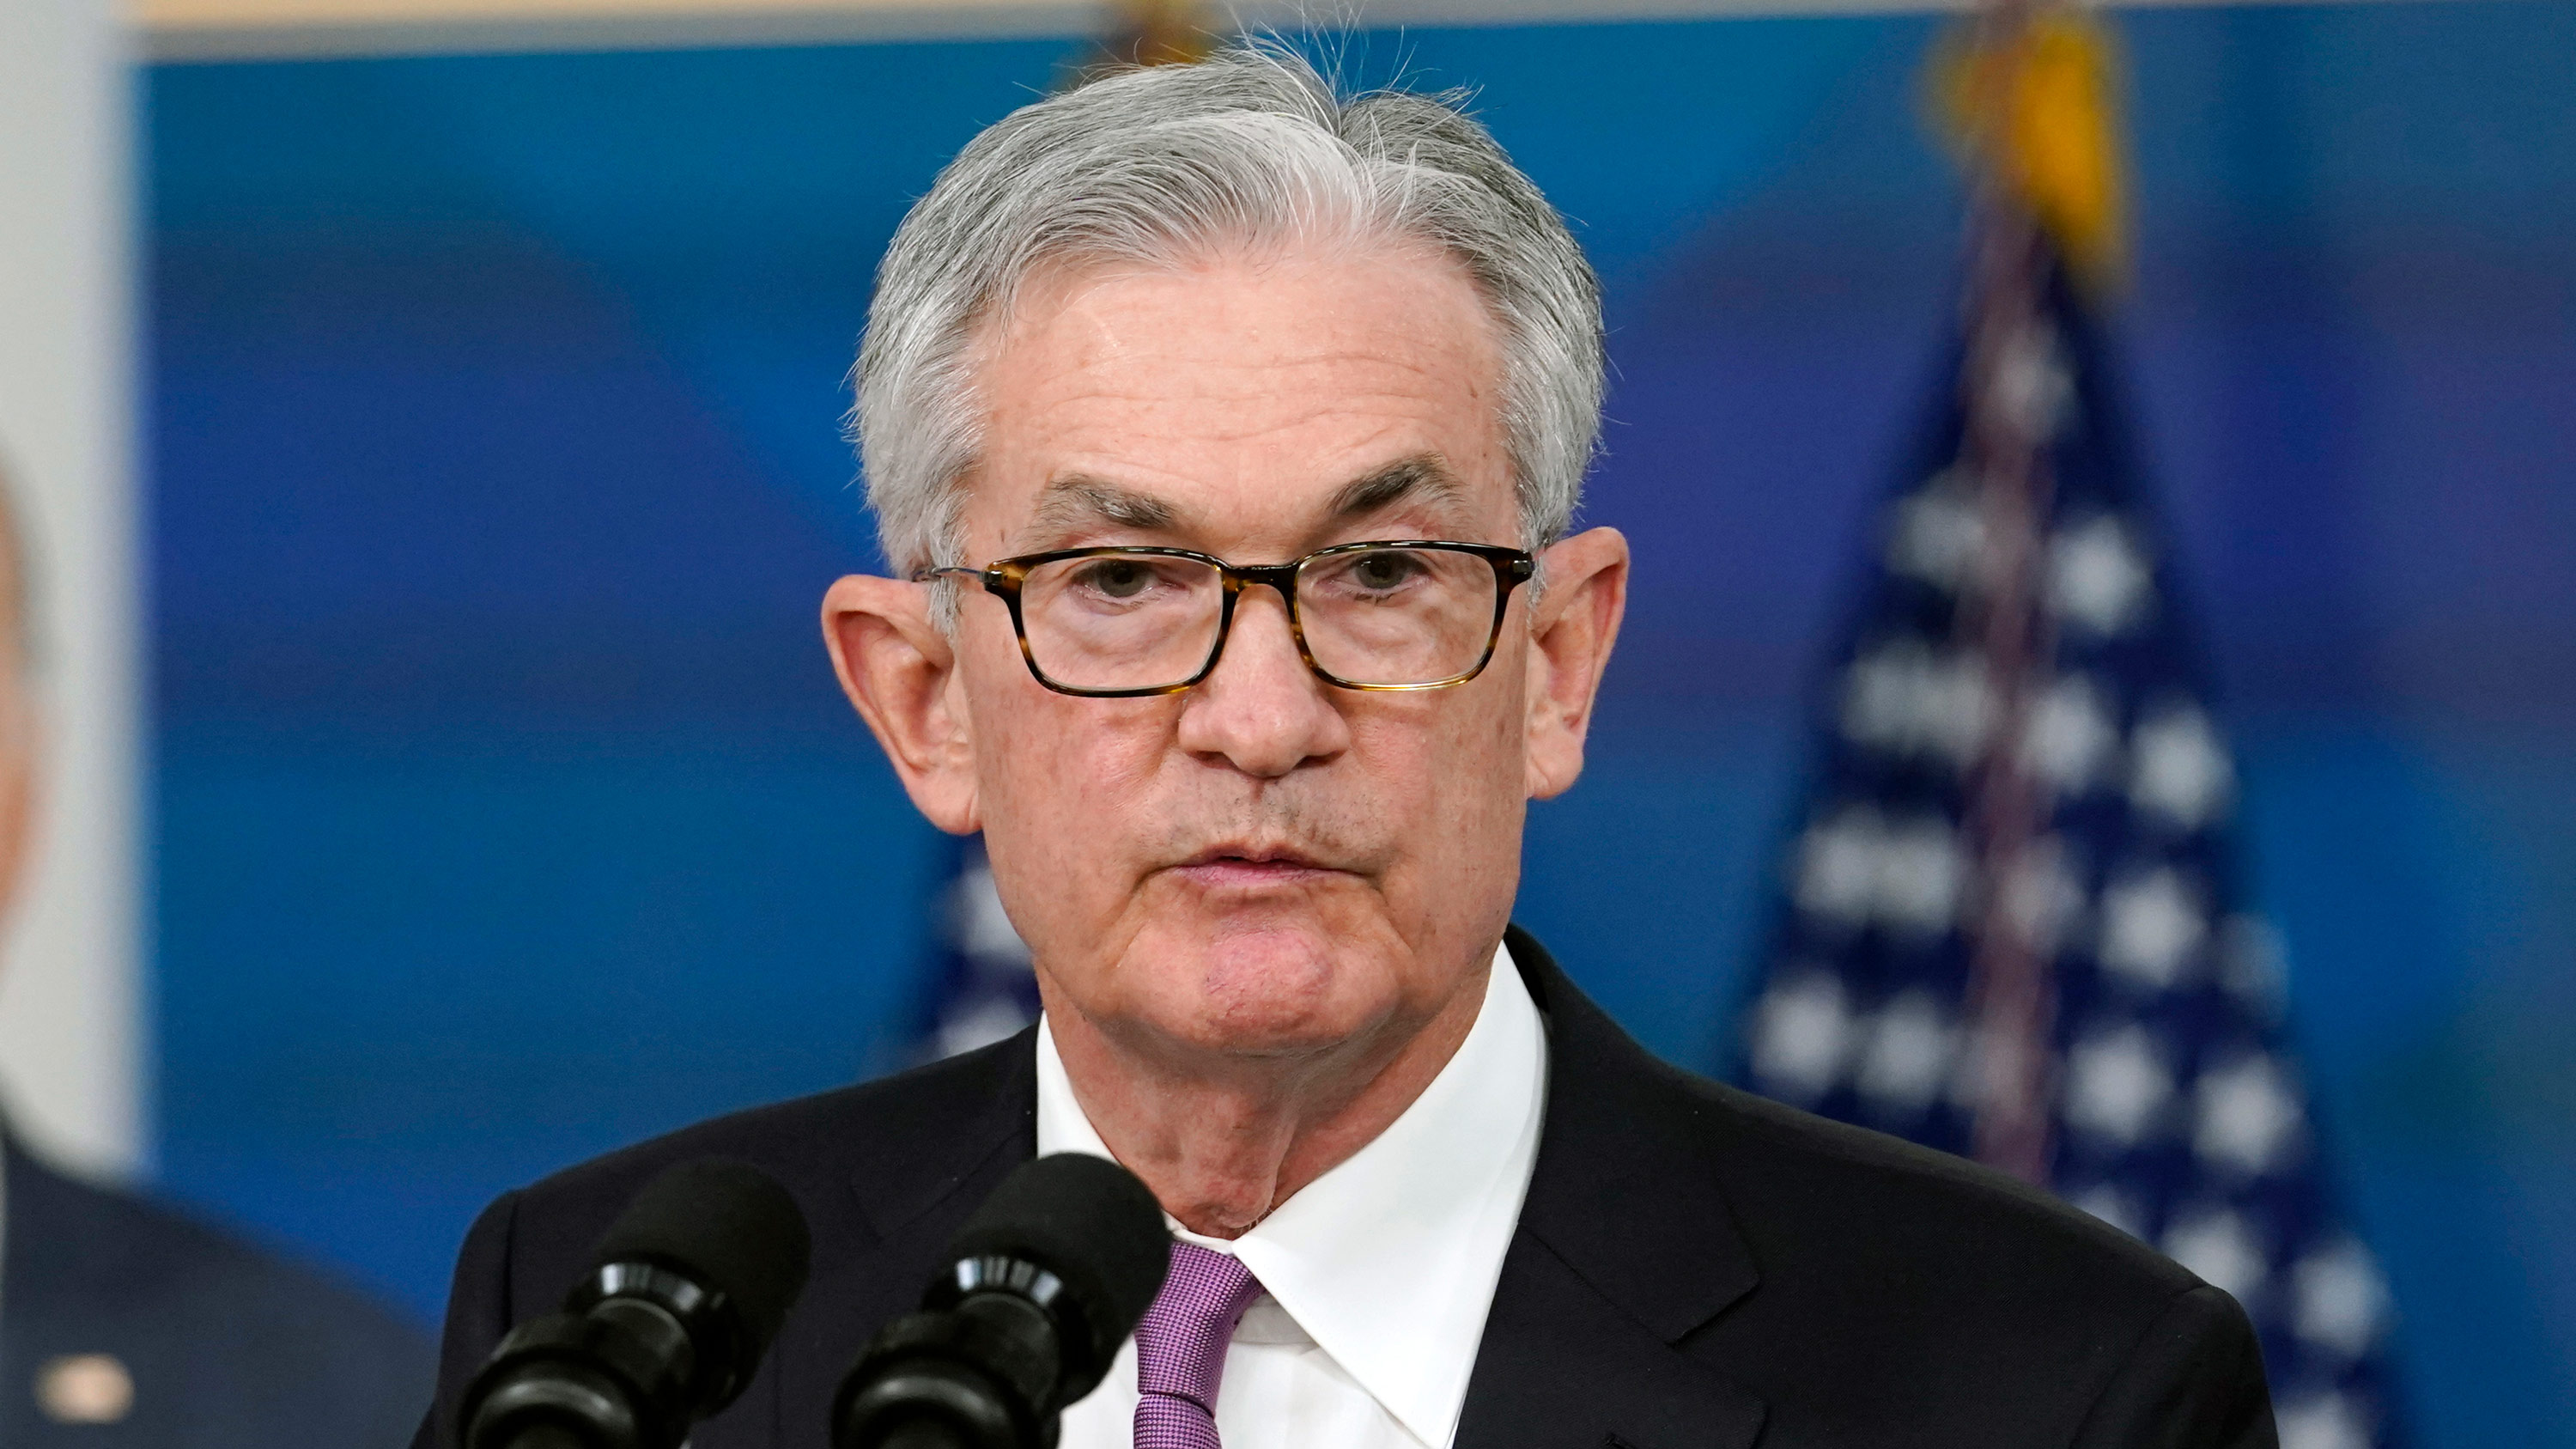 Federal Reserve Chairman Jerome Powell speaks during an event in the South Court Auditorium on the White House complex in Washington, DC, on November 22.